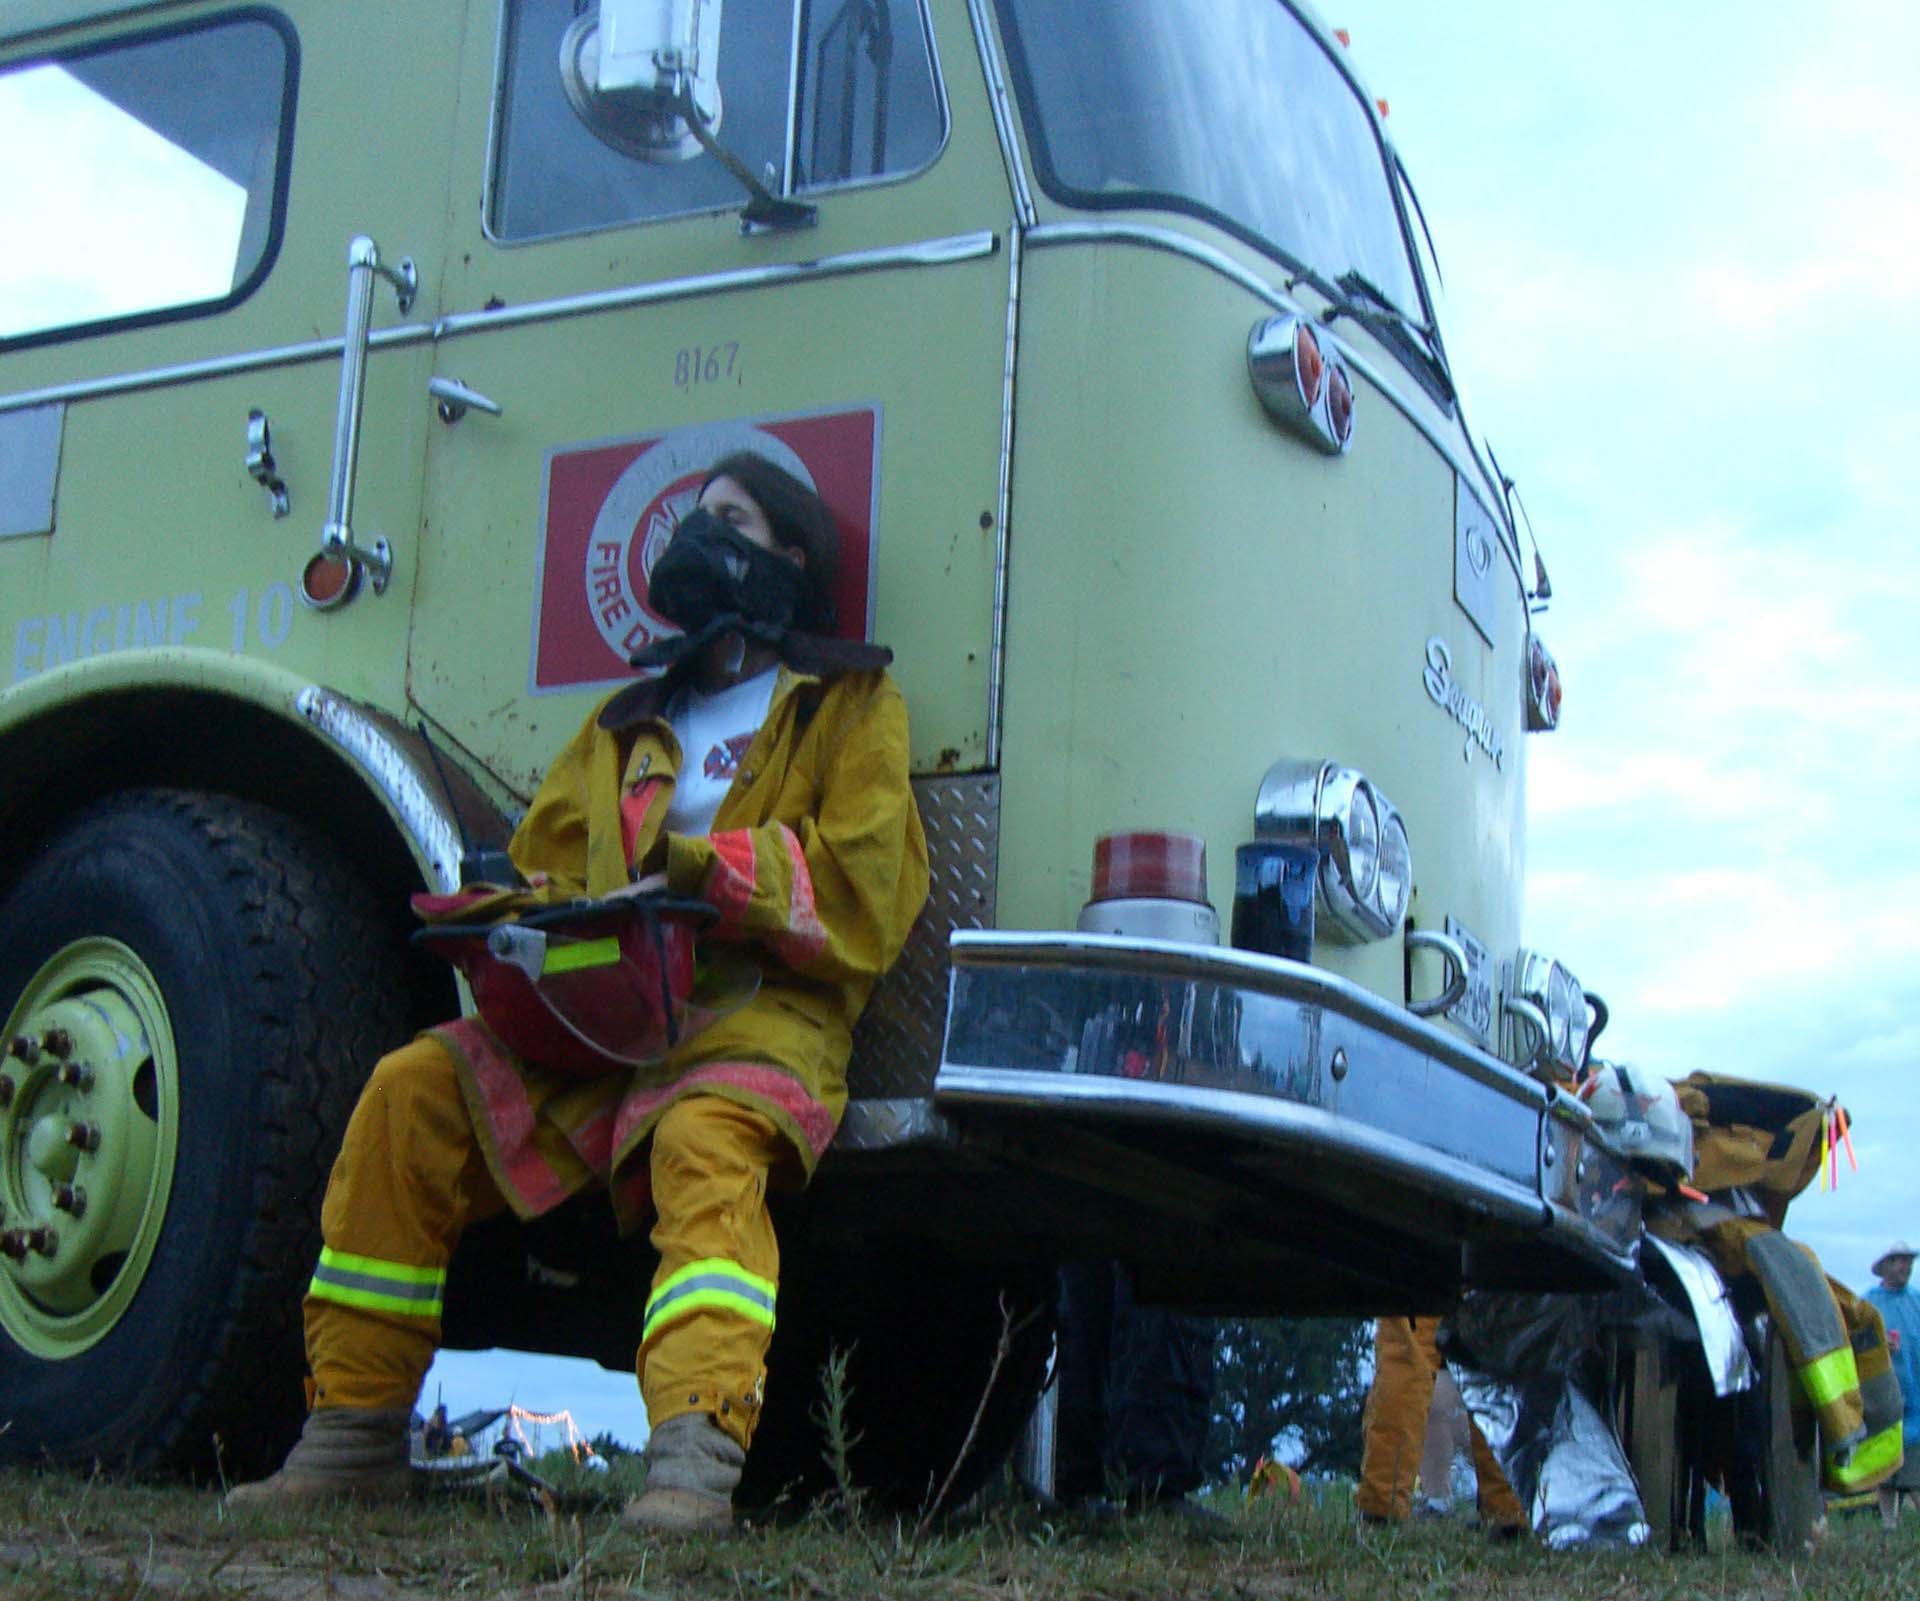 A firefighter in front of a firebus at Burning Flipside 2007